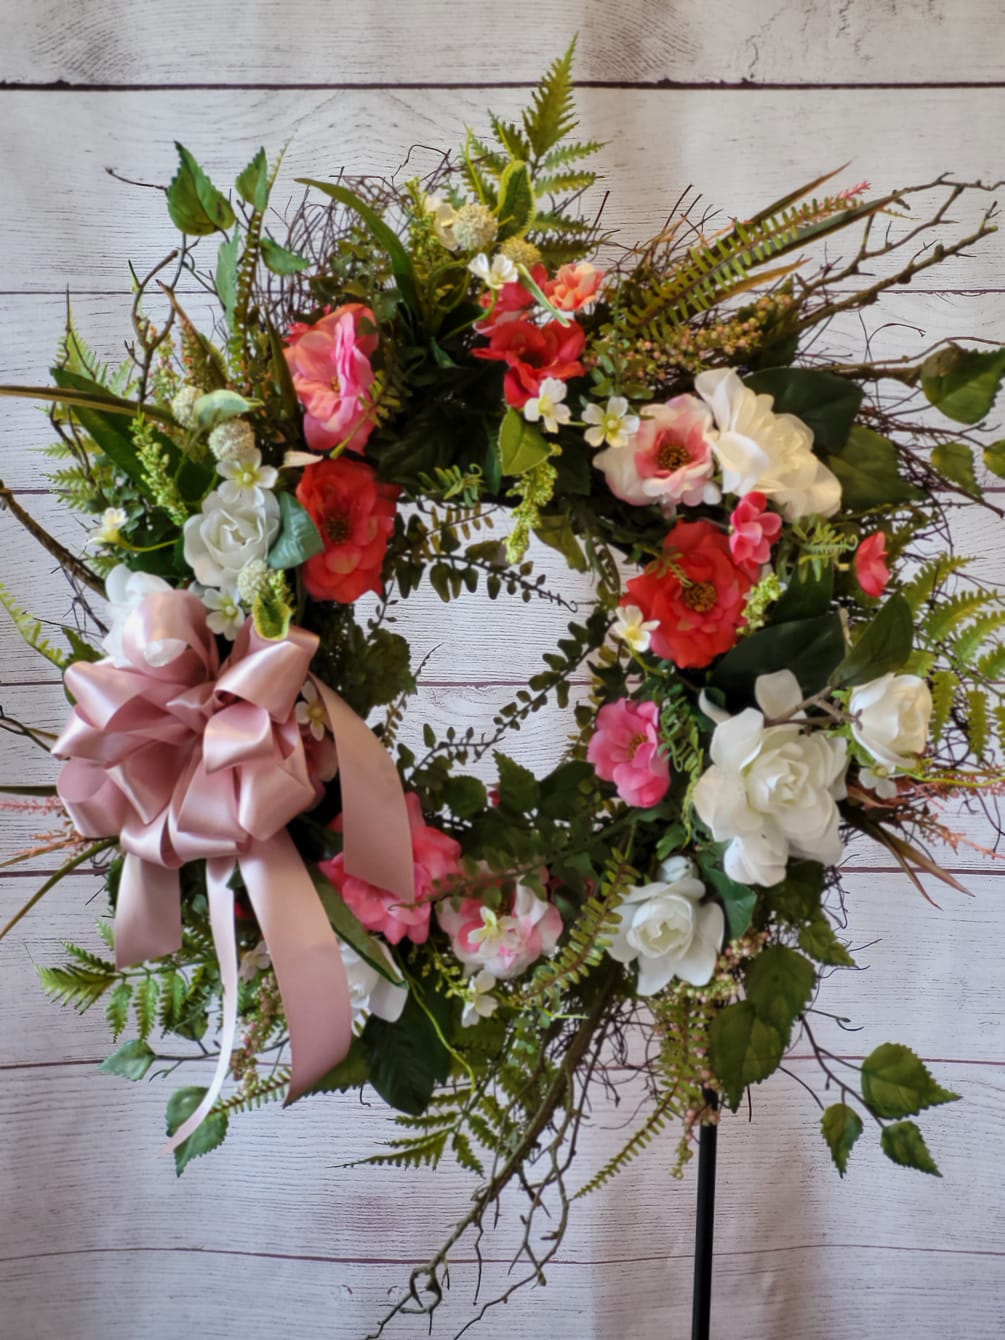 A beautiful spring wreath filled with shades of pink and white silk